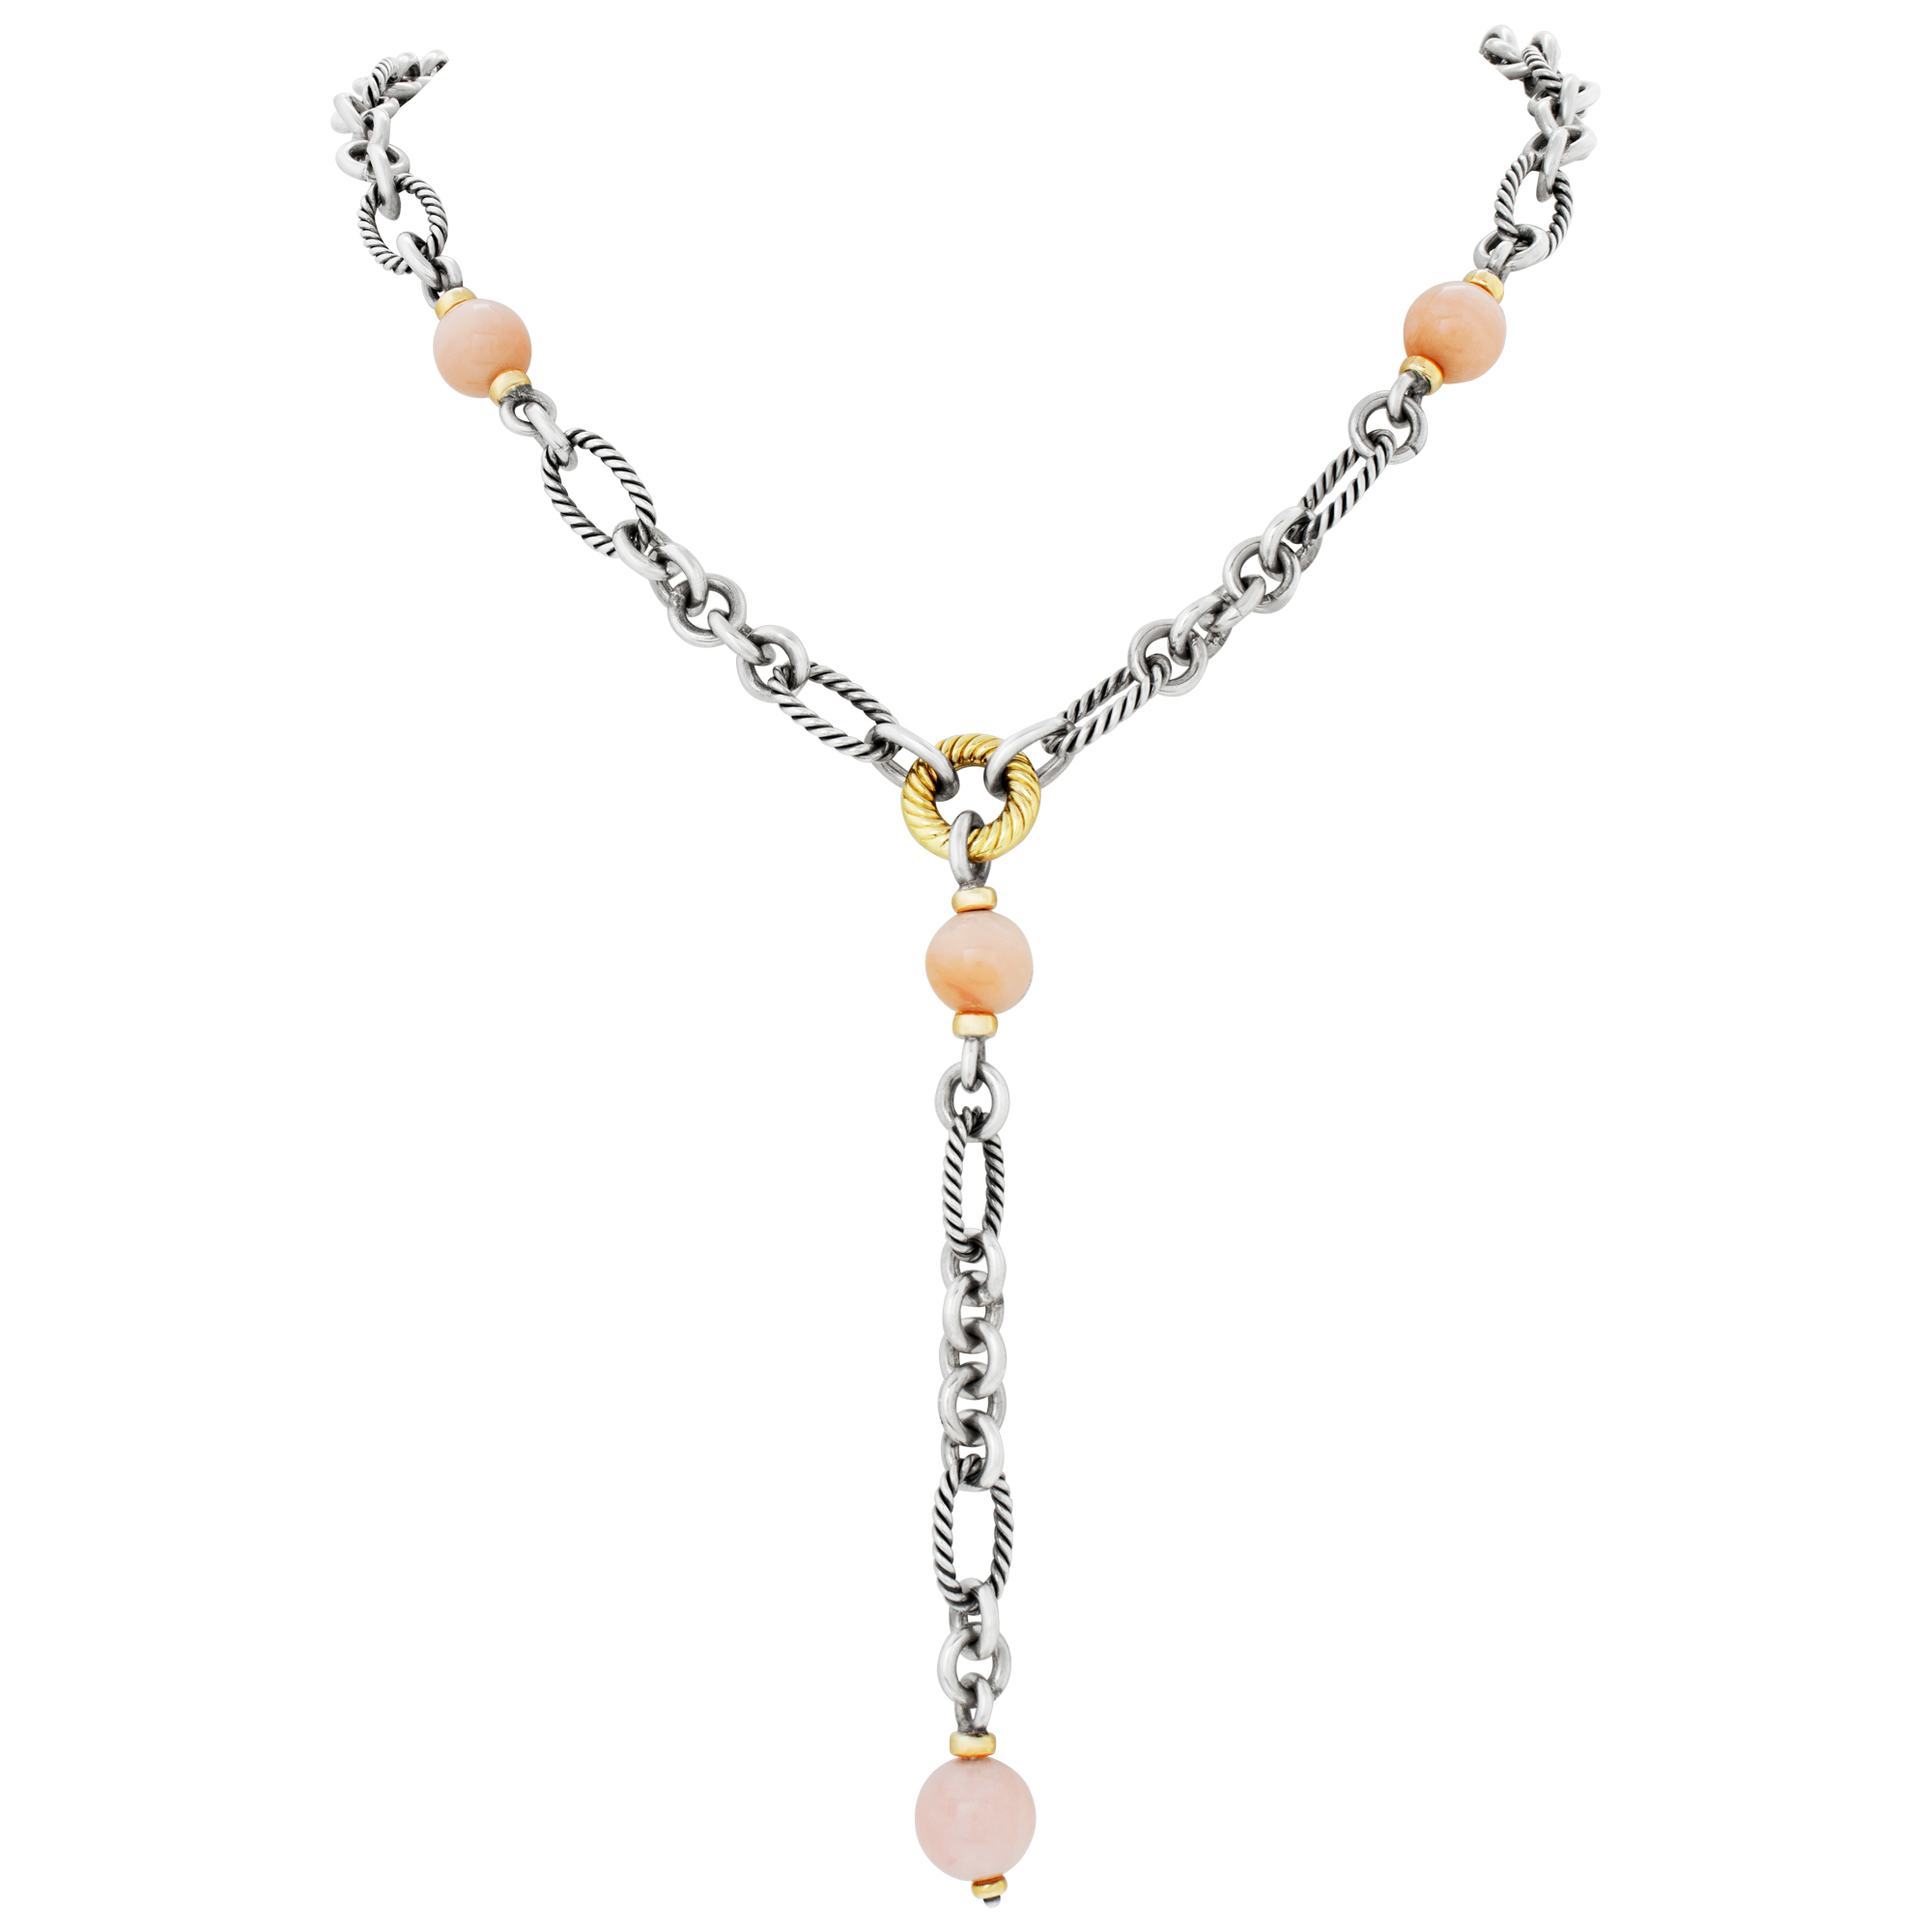 David Yurman 18'' necklace with rose quartz in sterling silver and 18k yellow gold